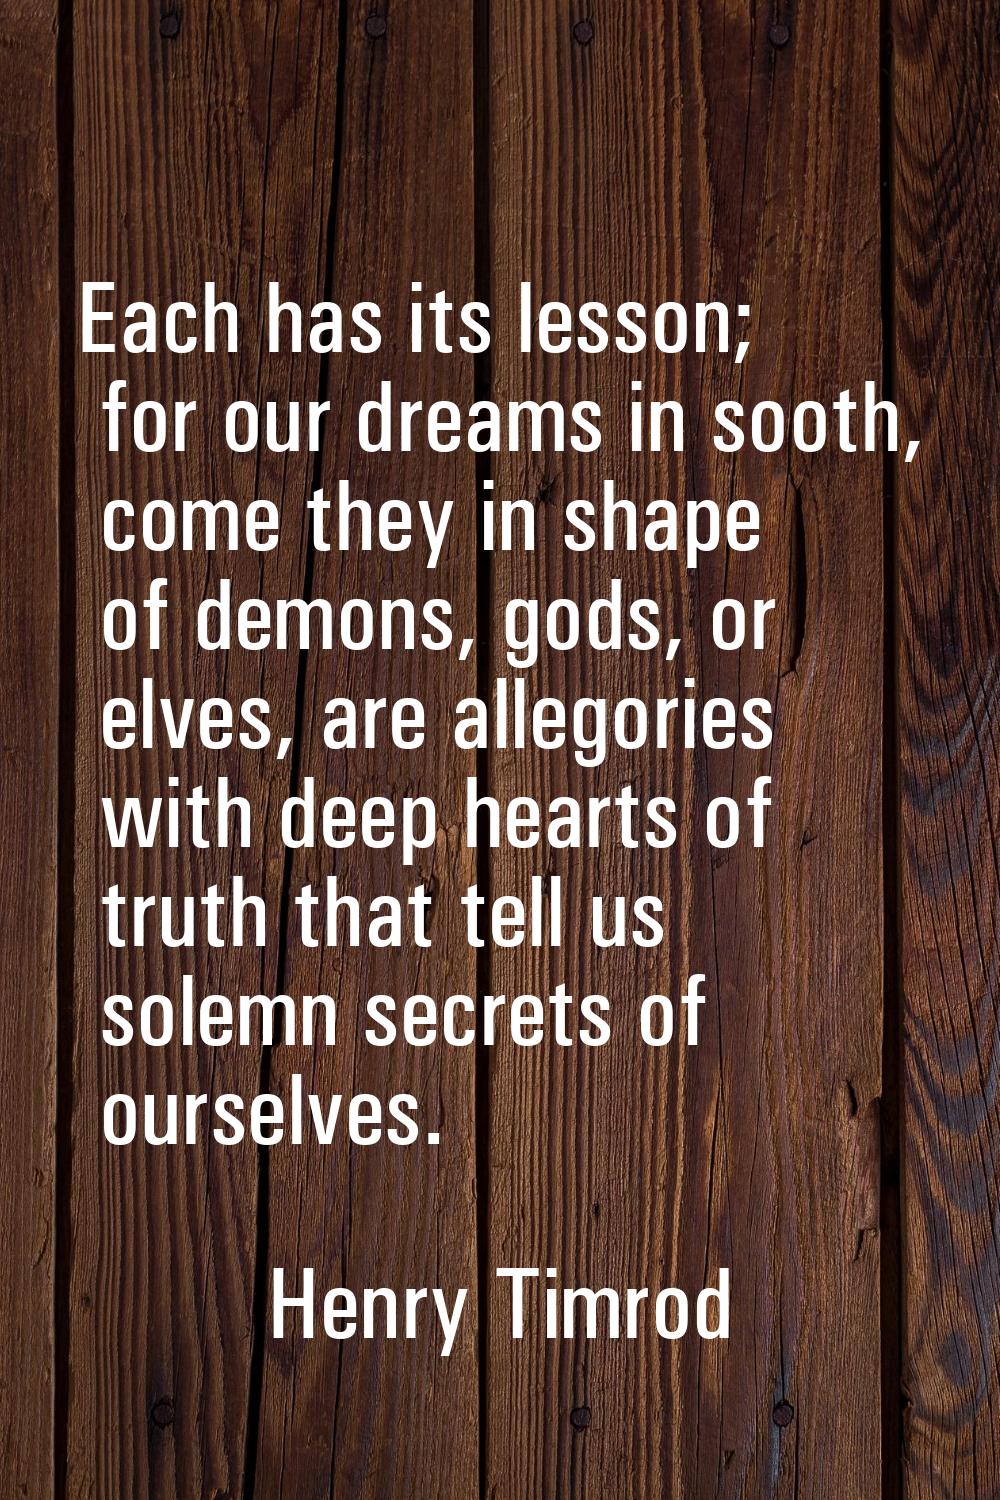 Each has its lesson; for our dreams in sooth, come they in shape of demons, gods, or elves, are all